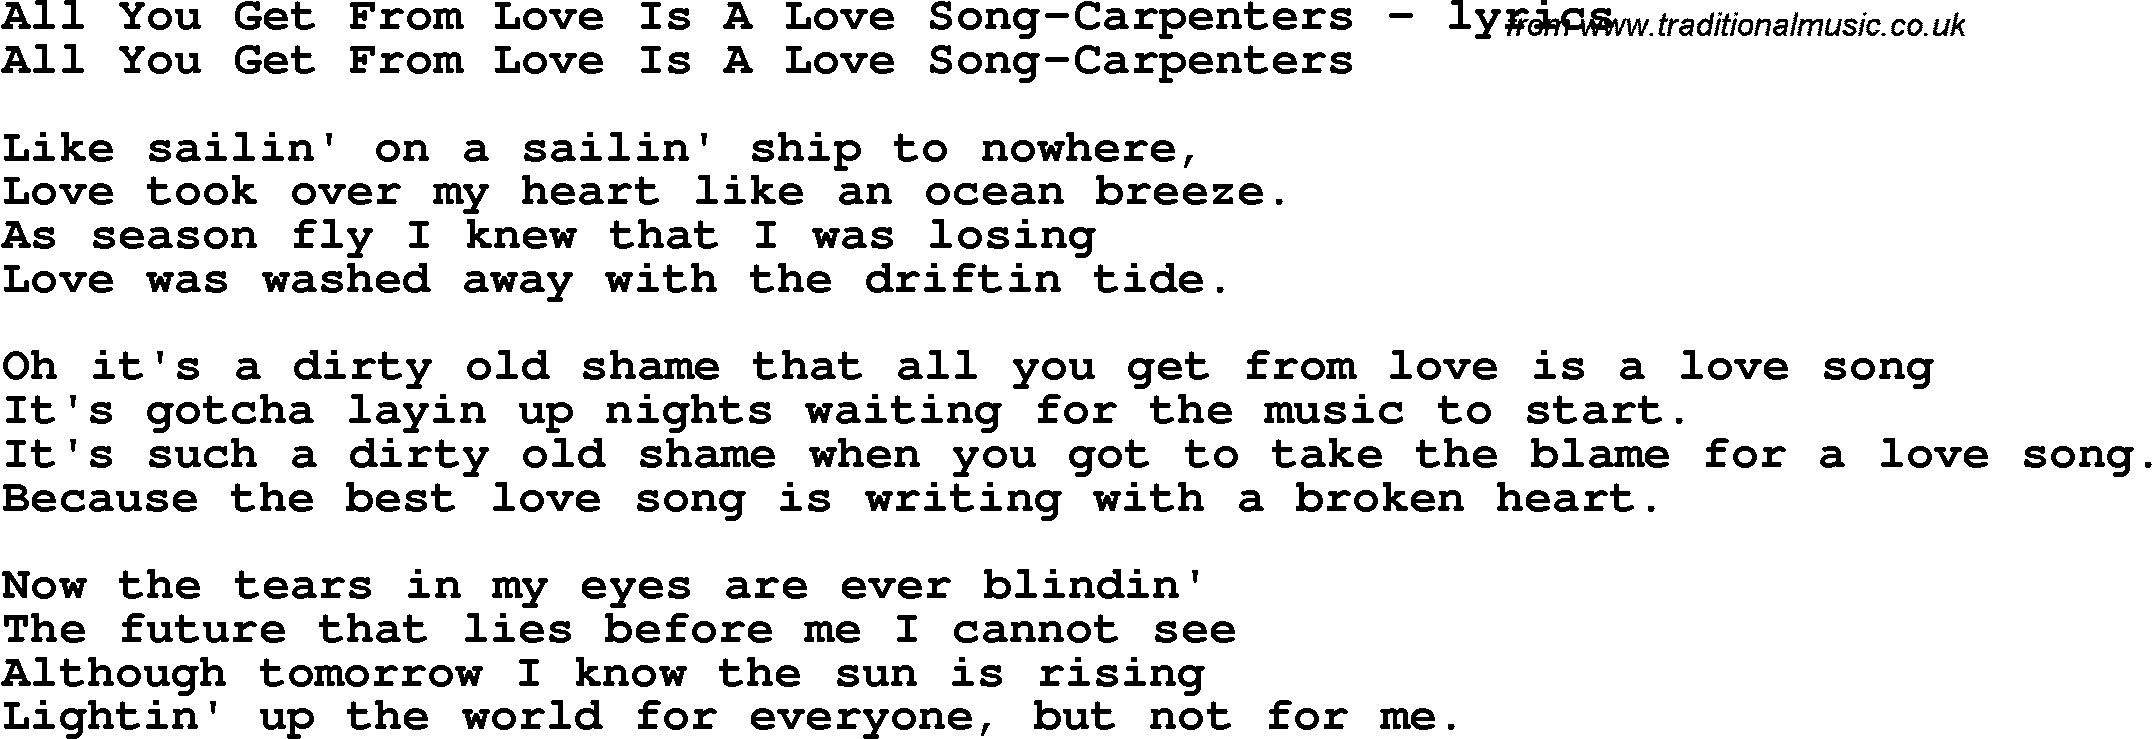 Love Song Lyrics for: All You Get From Love Is A Love Song-Carpenters